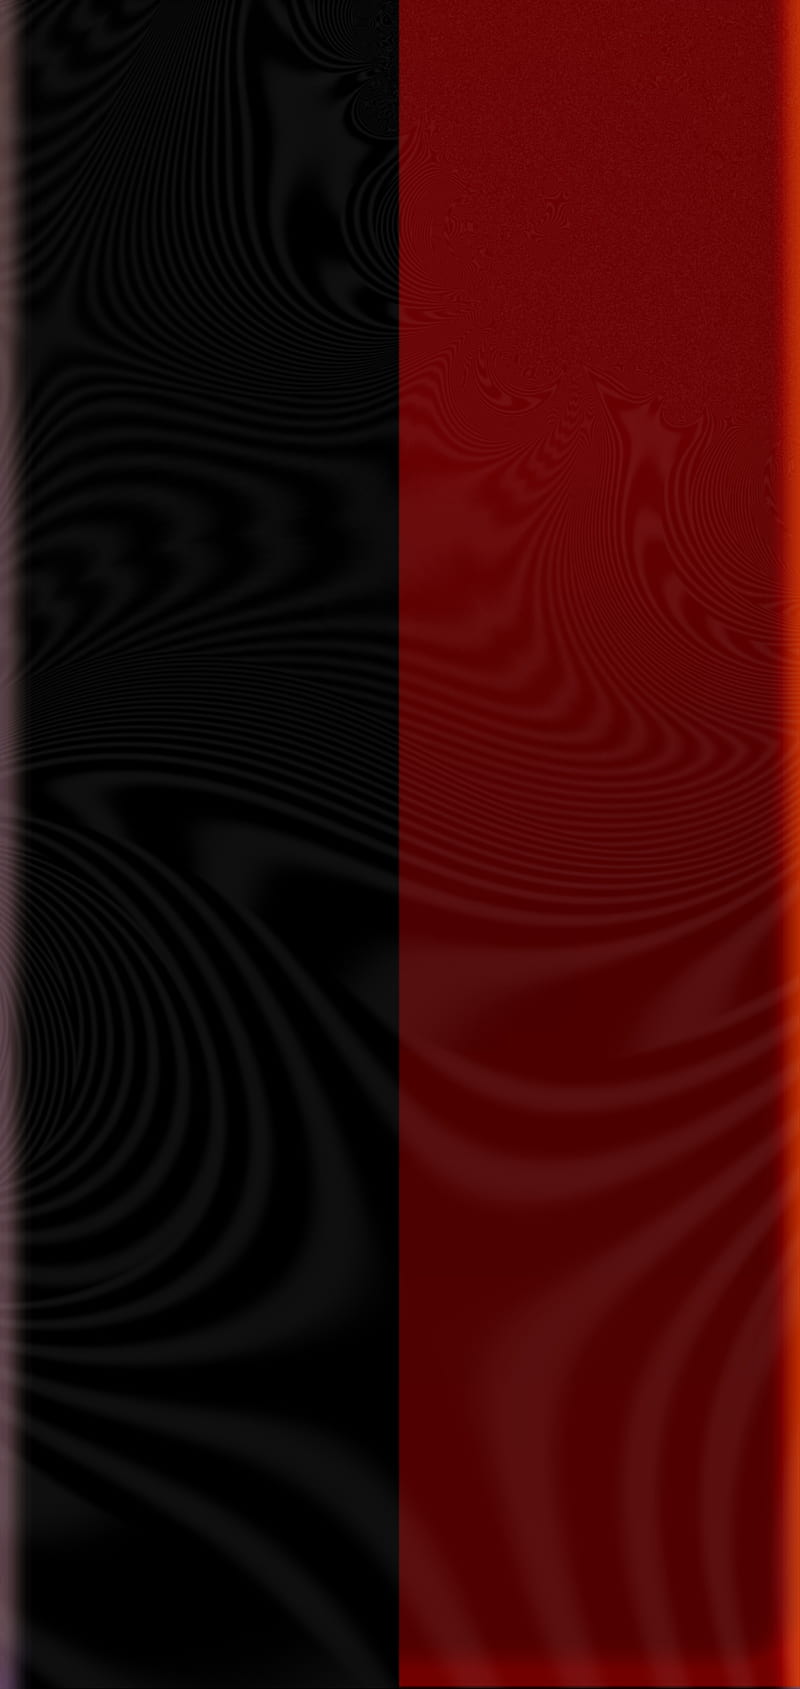 We love Black - Red, android, colours, duo, edge, iphone, patern, samsung, themes, HD phone wallpaper